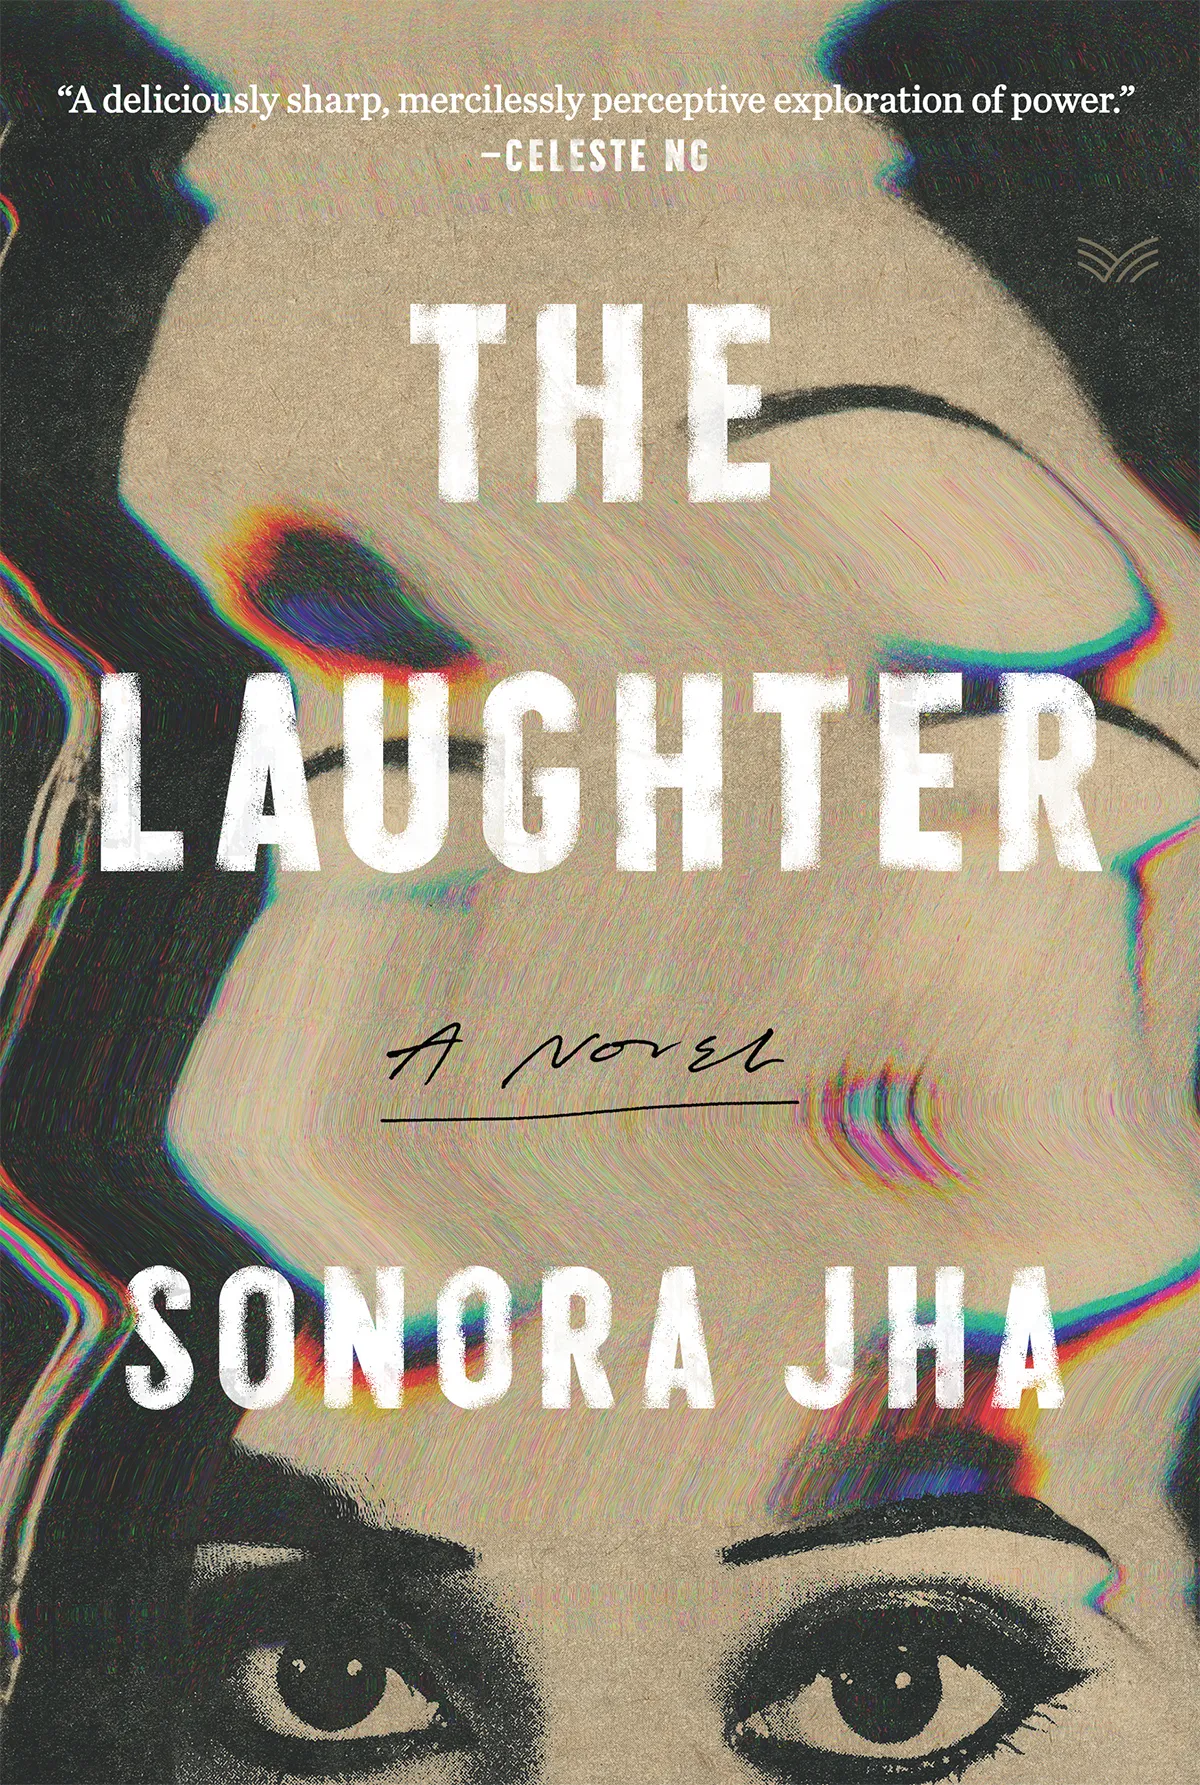 The Laughter